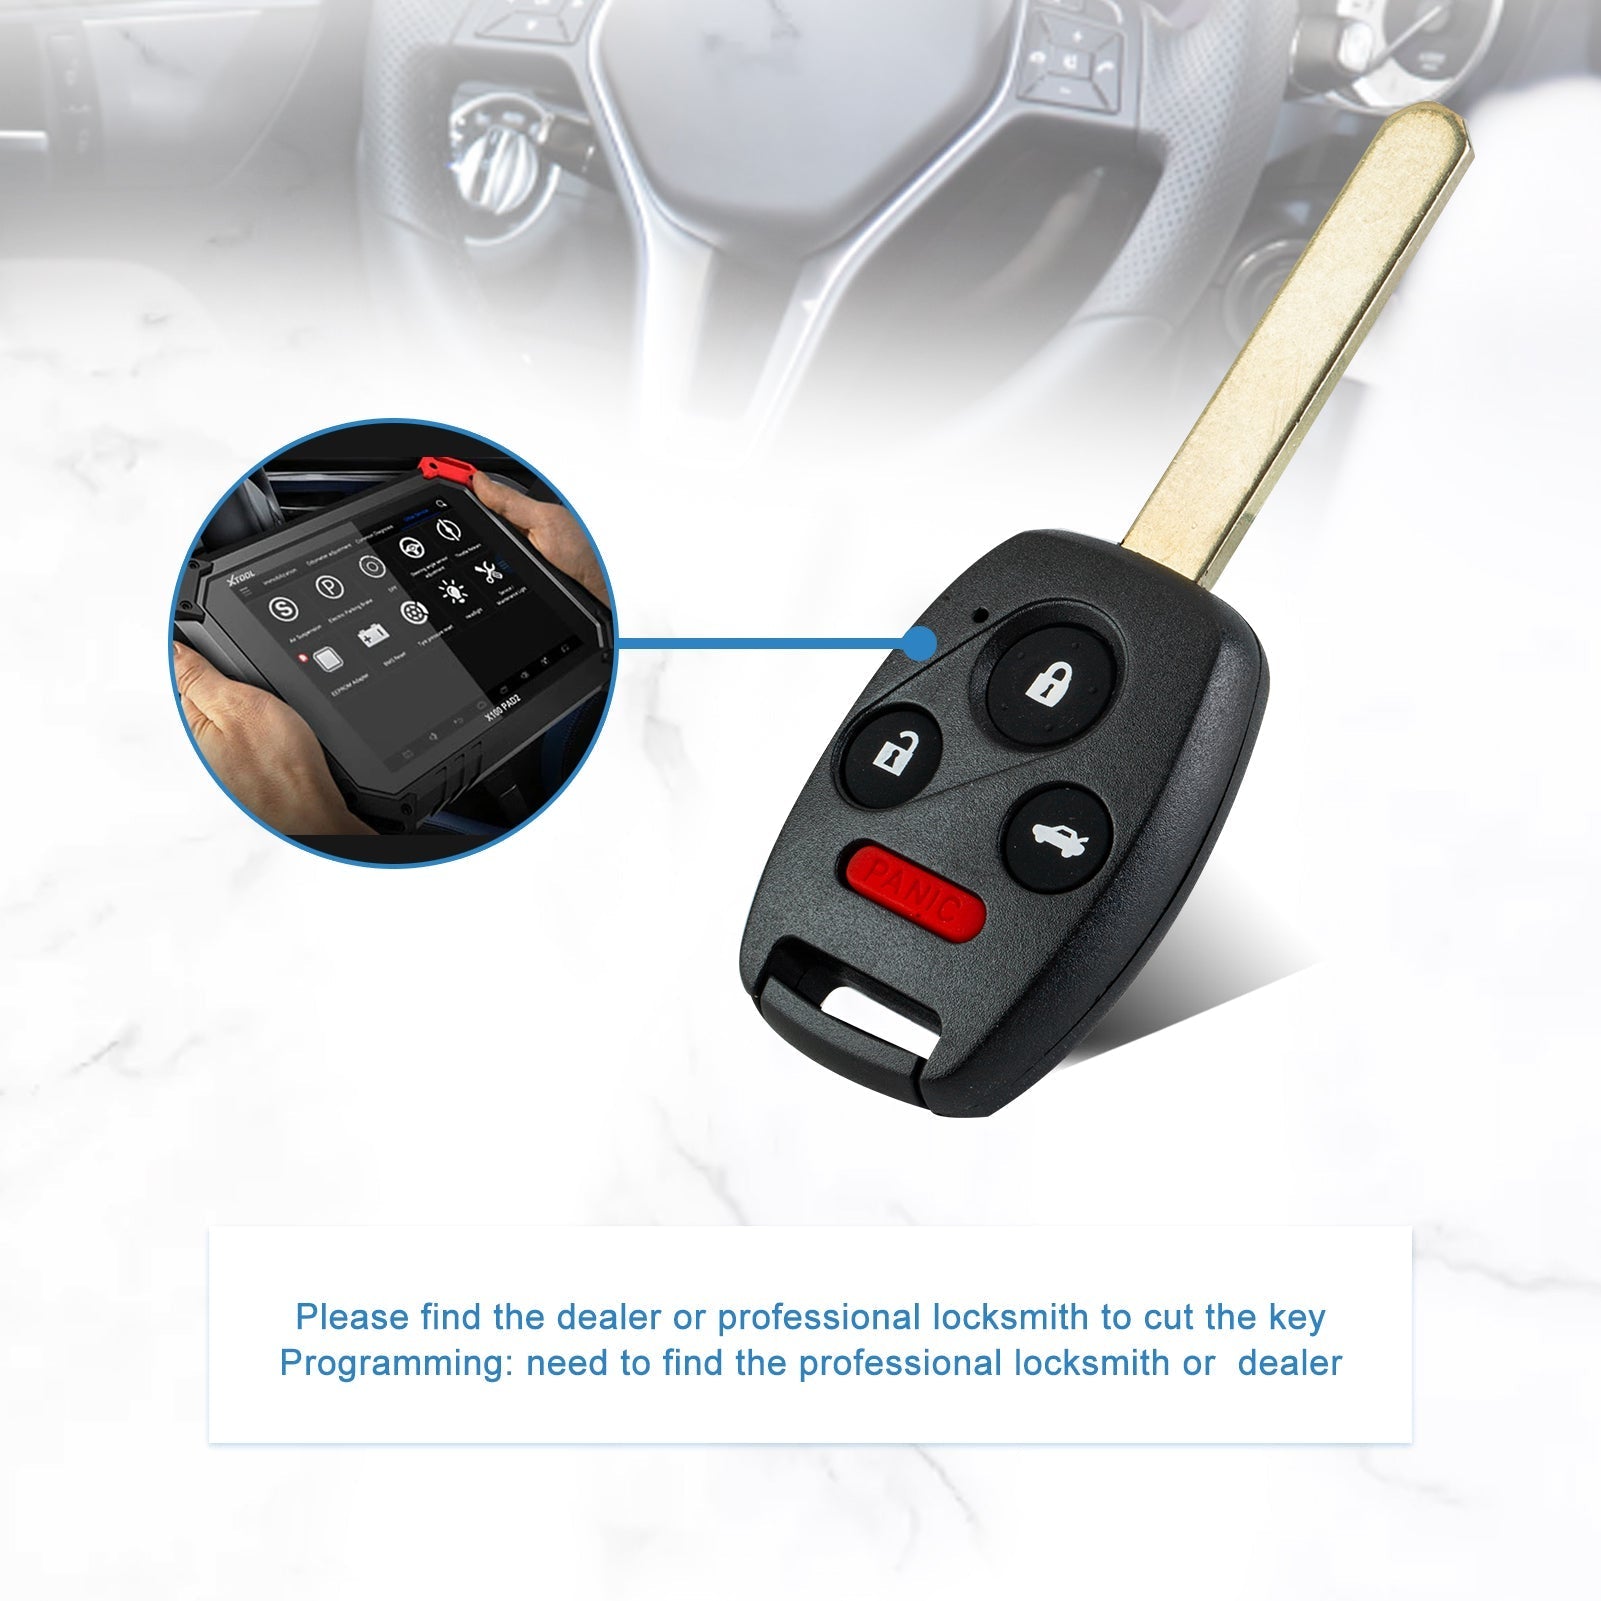 Button Car Remote Control Keyless Entry Remote 313.8MHZ Replacement for 2006-2011 Civic EX Si N5F-S0084A  KR-H4SB-10